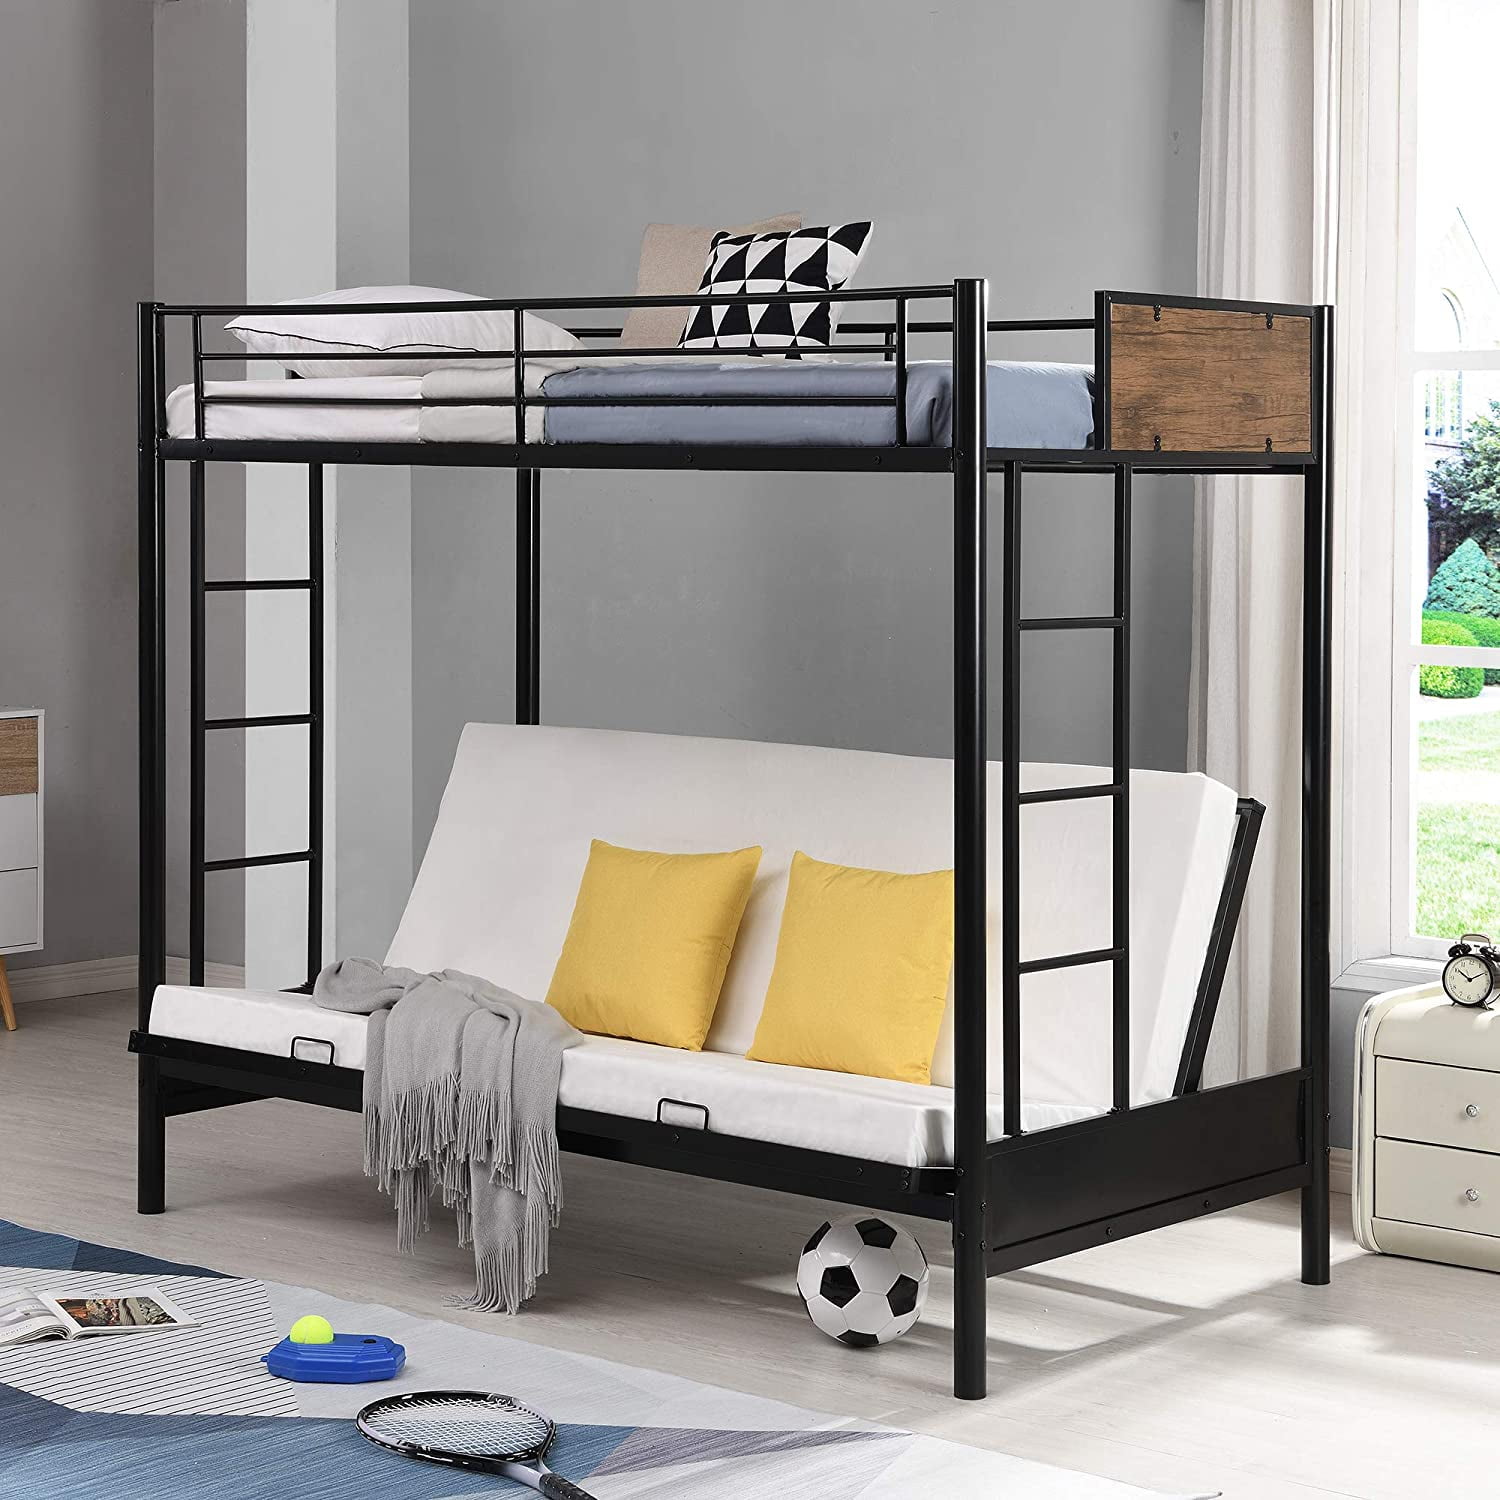 Piscis Convertible Twin Over Futon Bed, Triple Bunk Bed With Futon